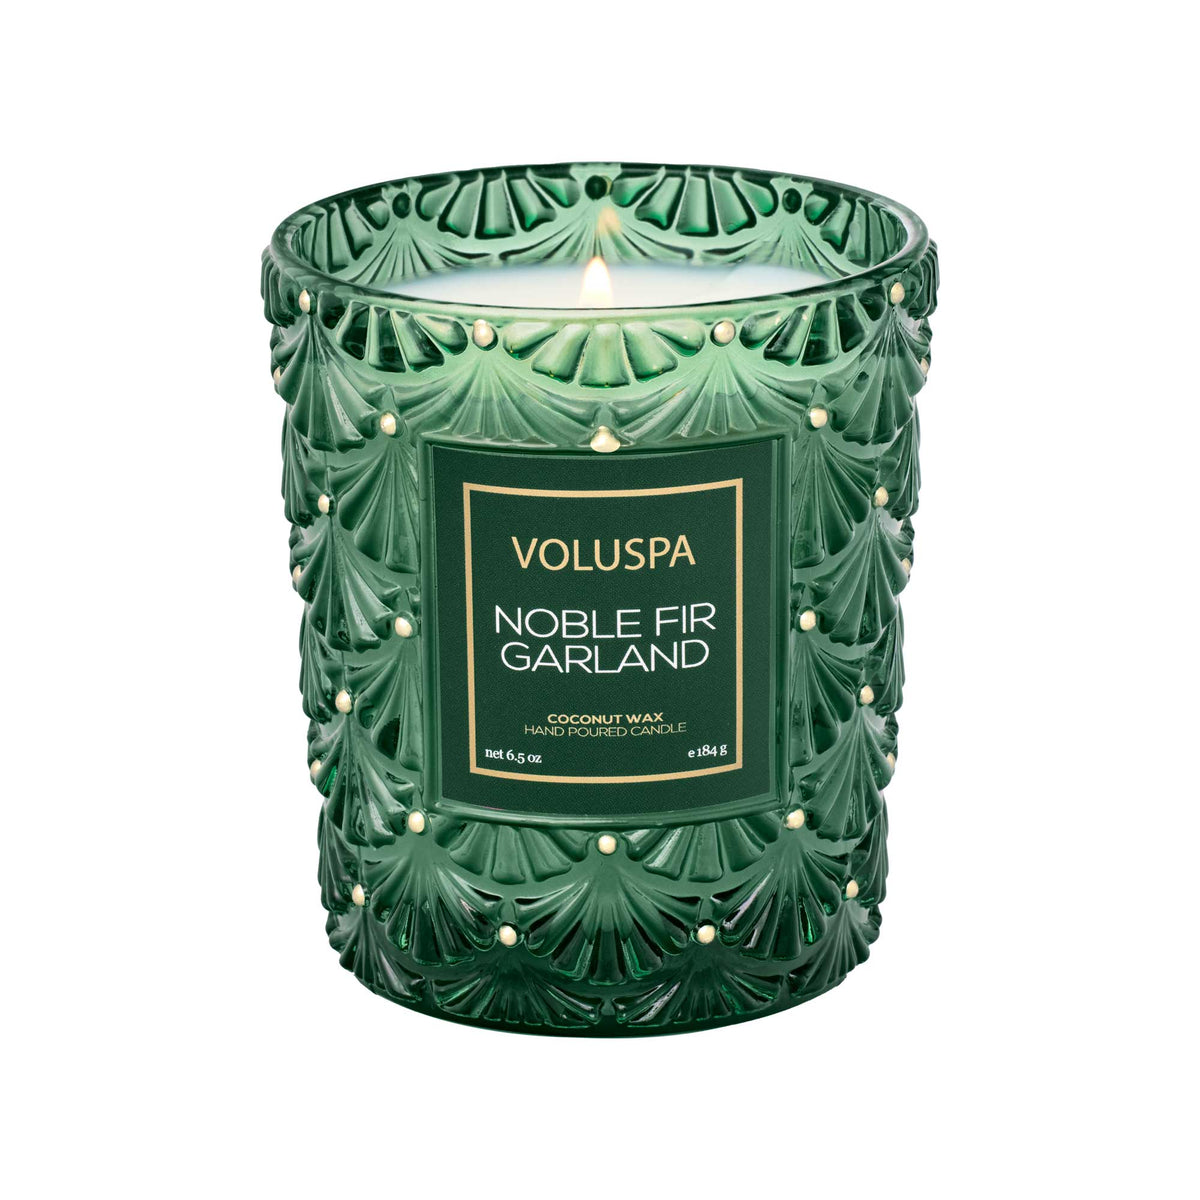 NOBLE FIR GARLAND - CLASSIC CANDLE 184G - LAZADO